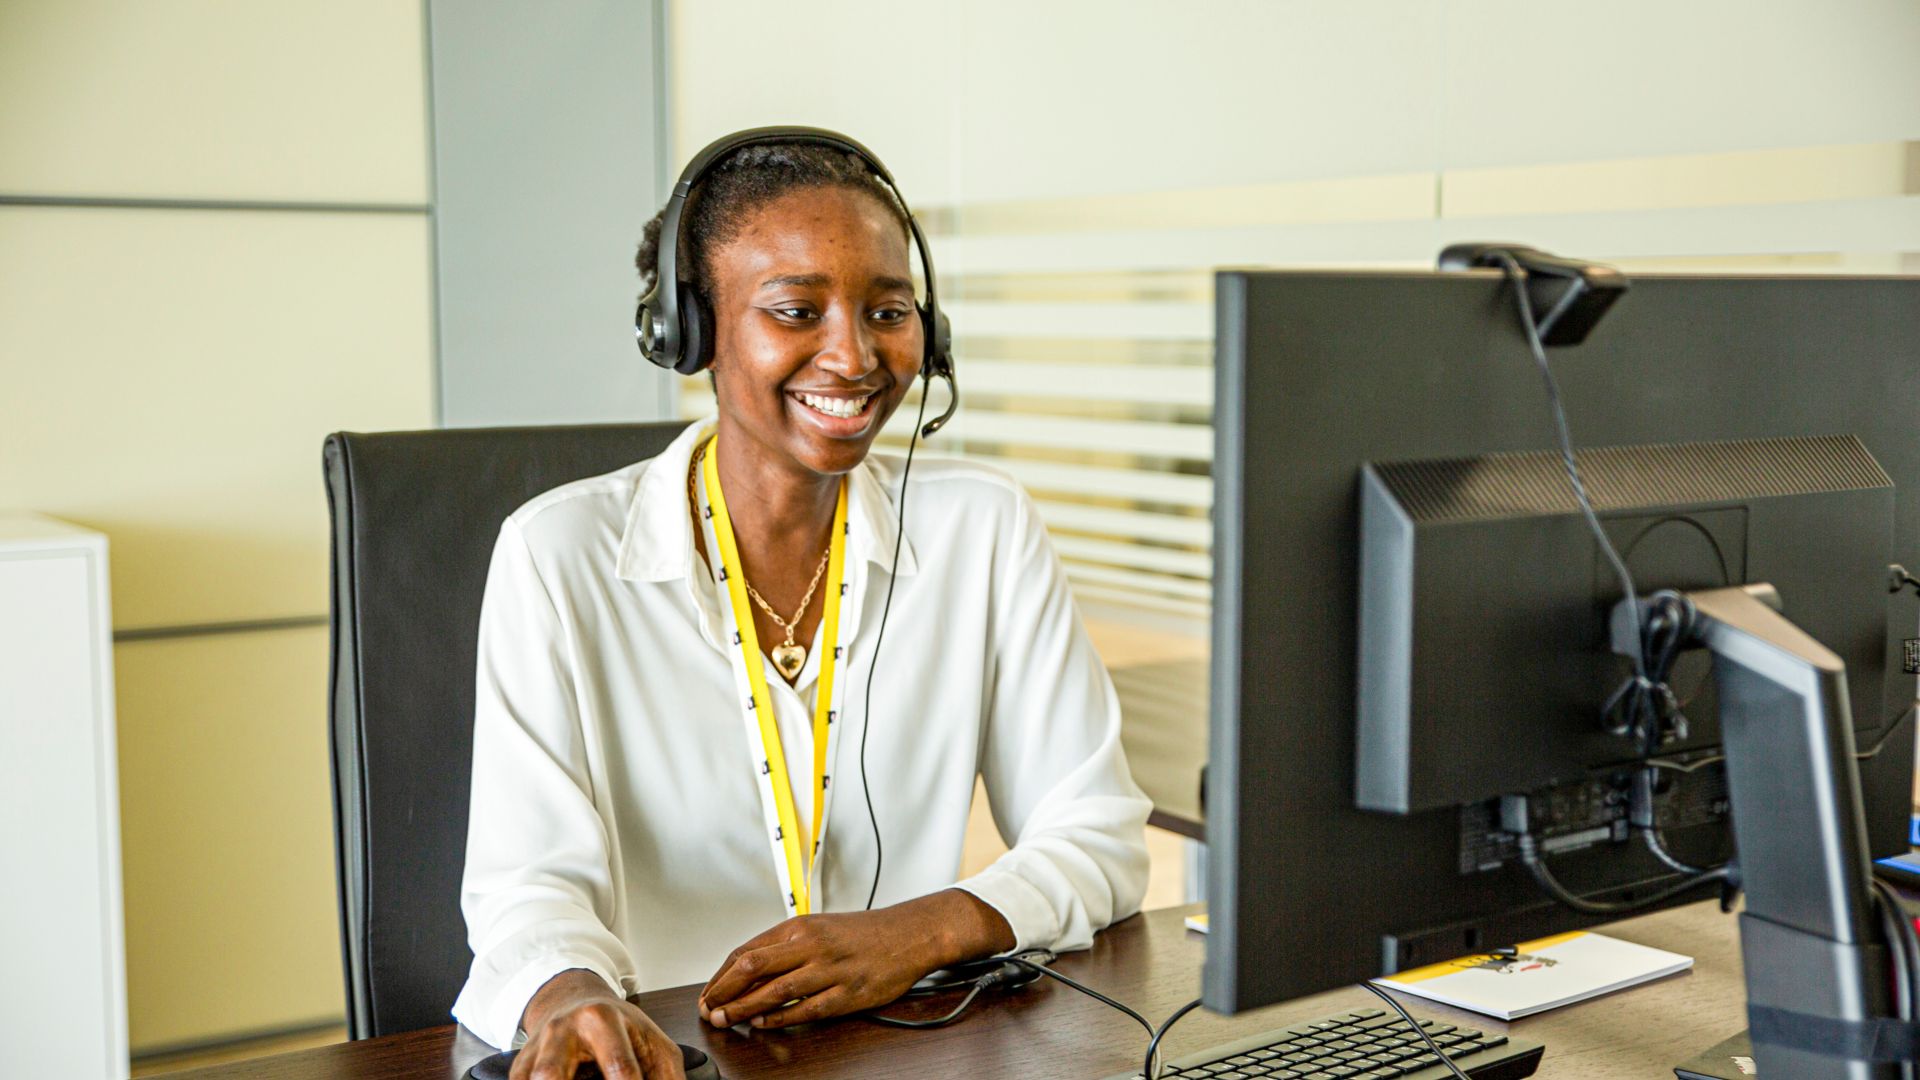 African Eni employee smiles in front of computer